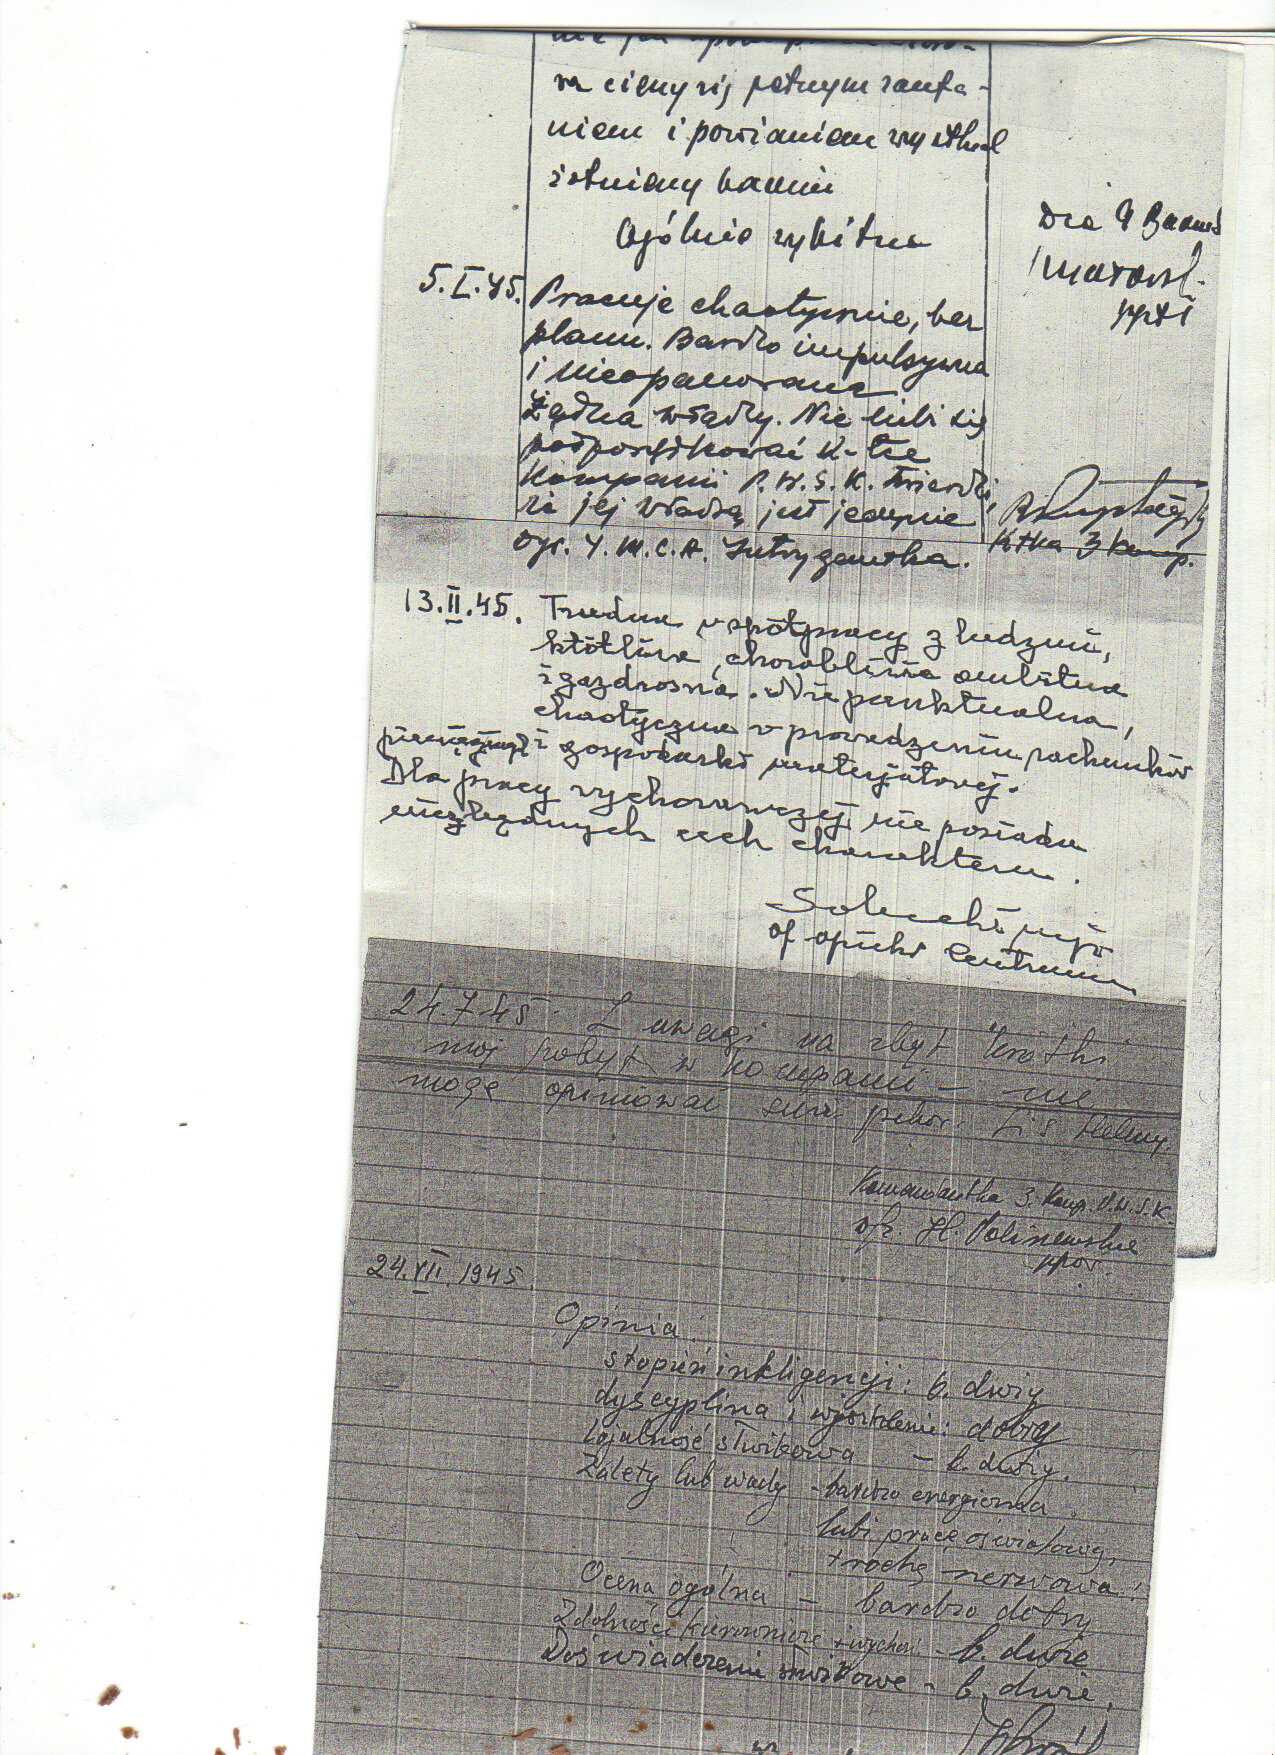 helena Lis booklet P 12 comments.jpg